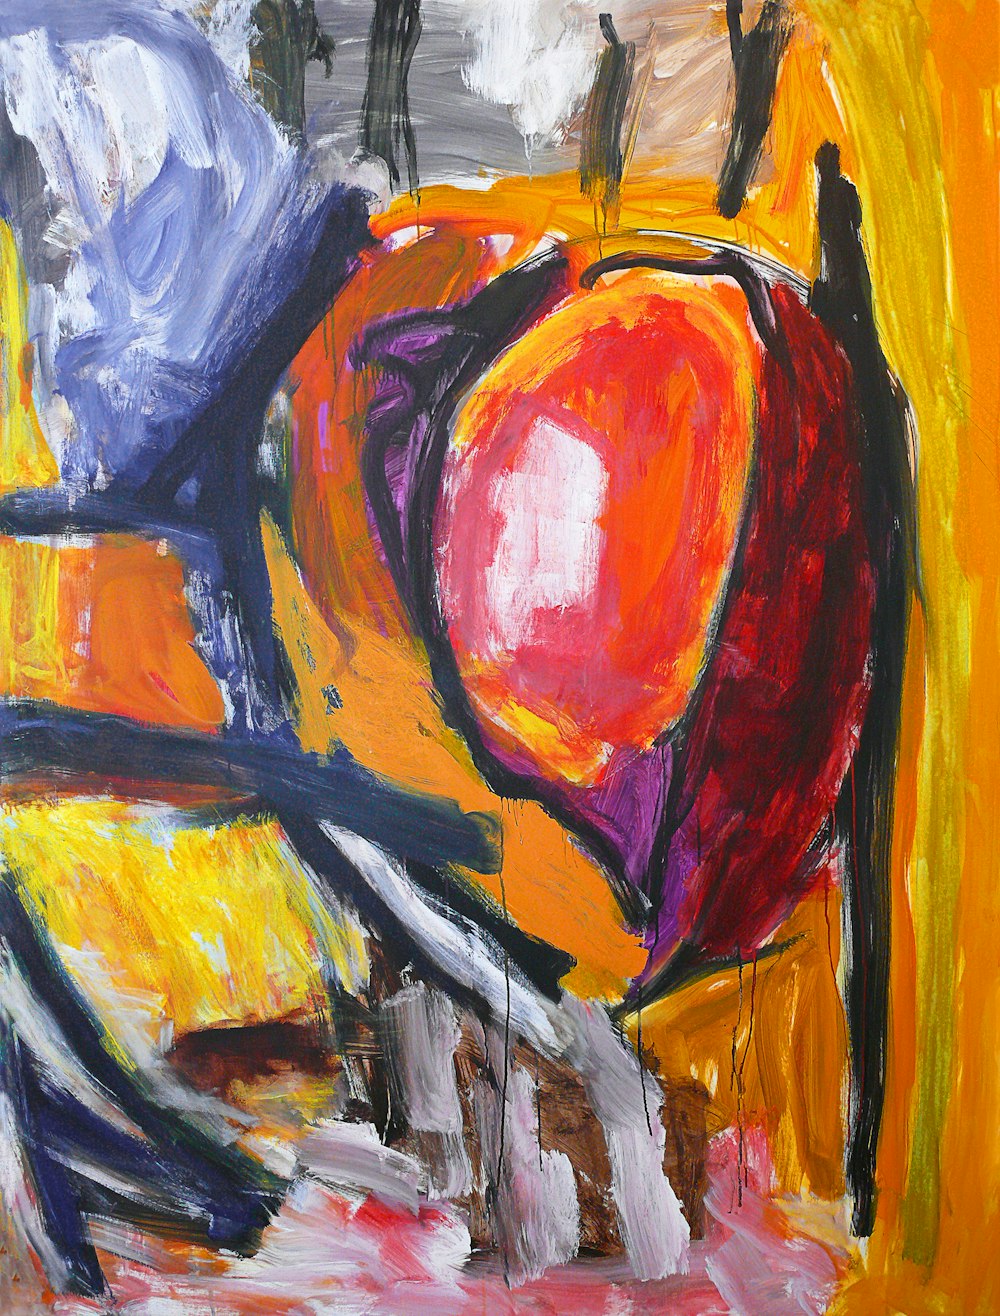 a painting of an apple and a banana on a yellow background